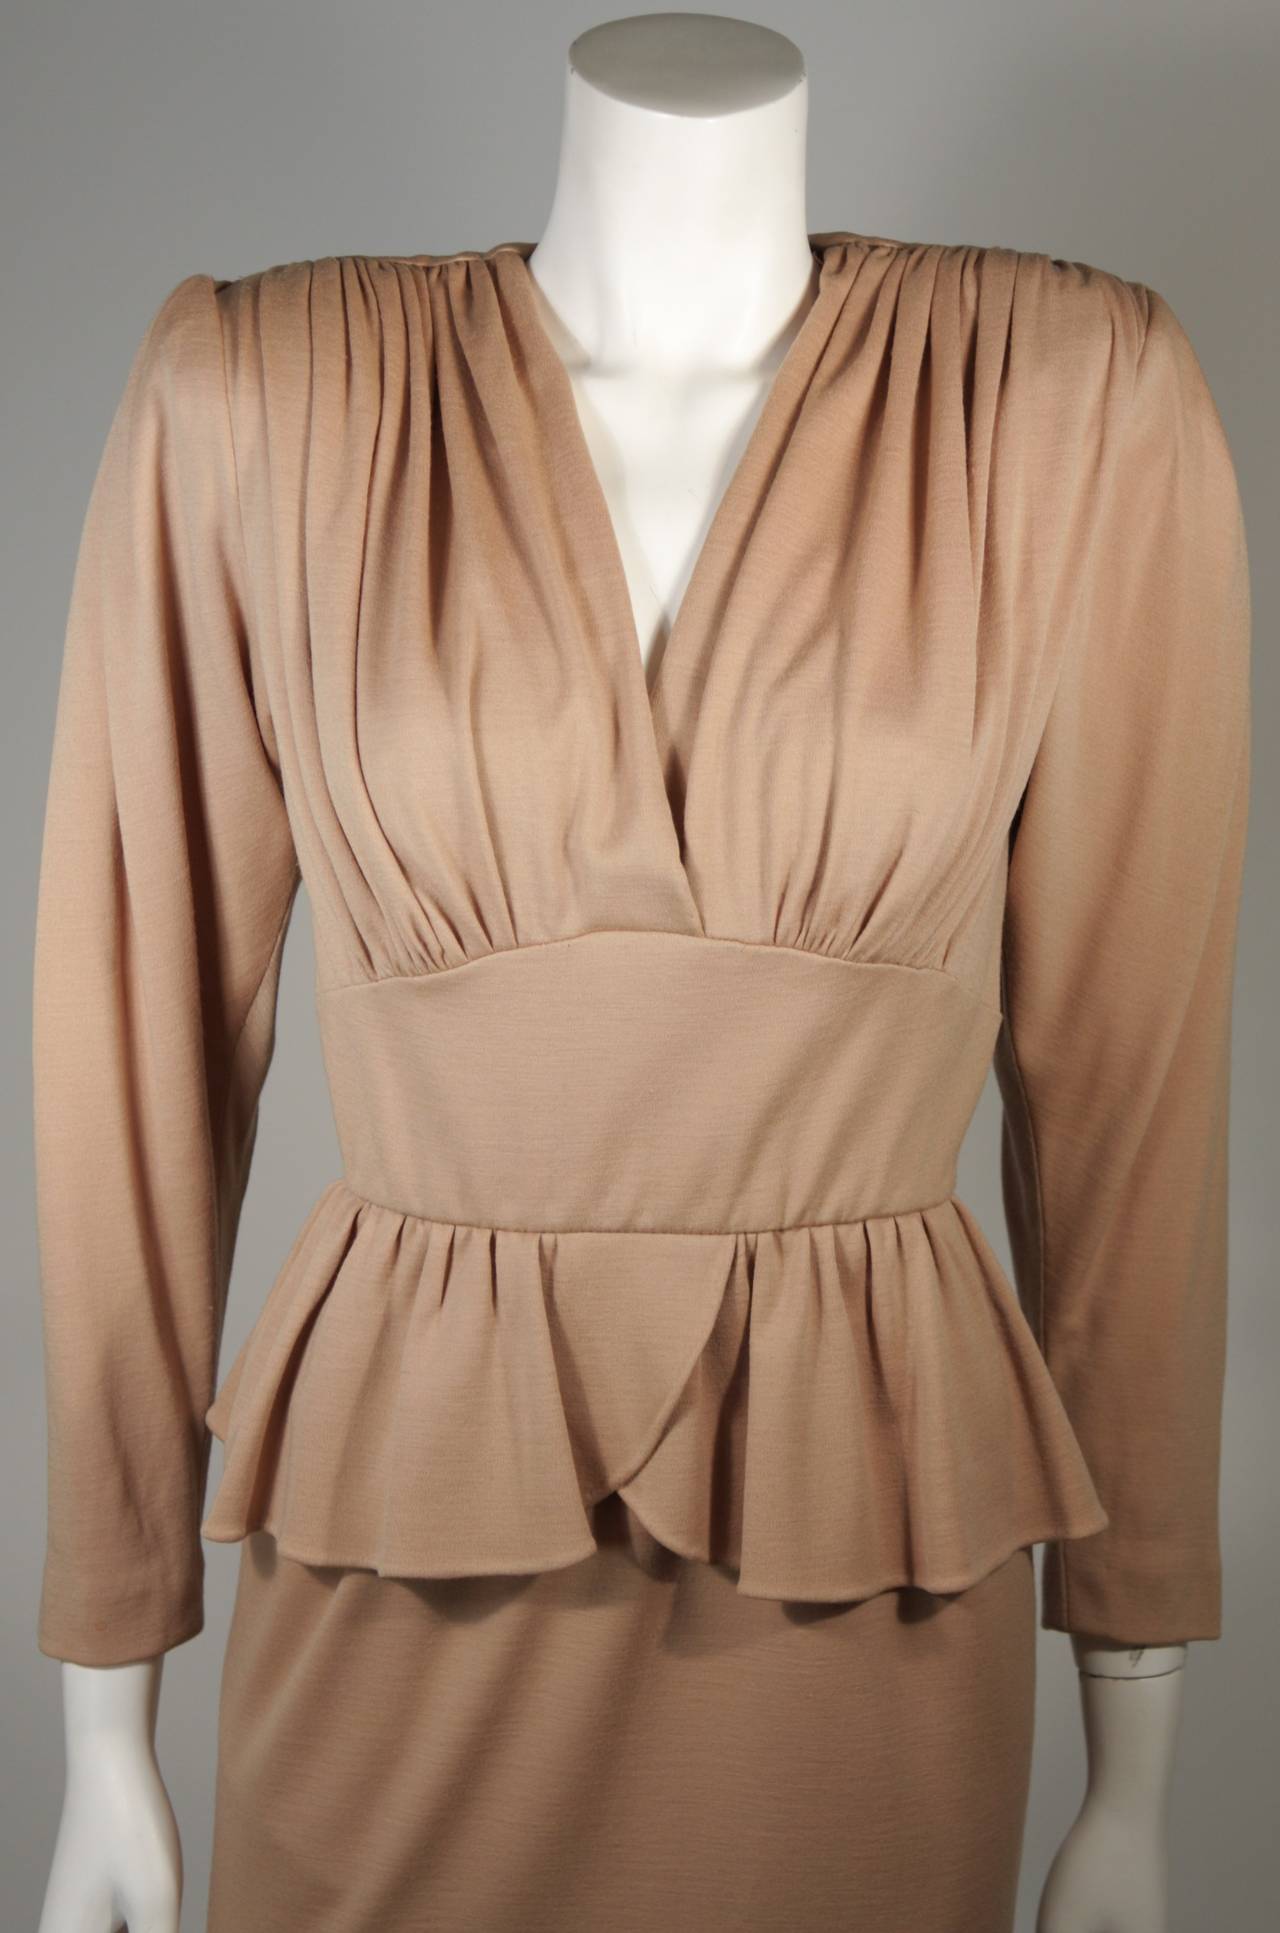 Brown Nolan Miller Attributed Camel Wool Cape and Cocktail Dress Size Small